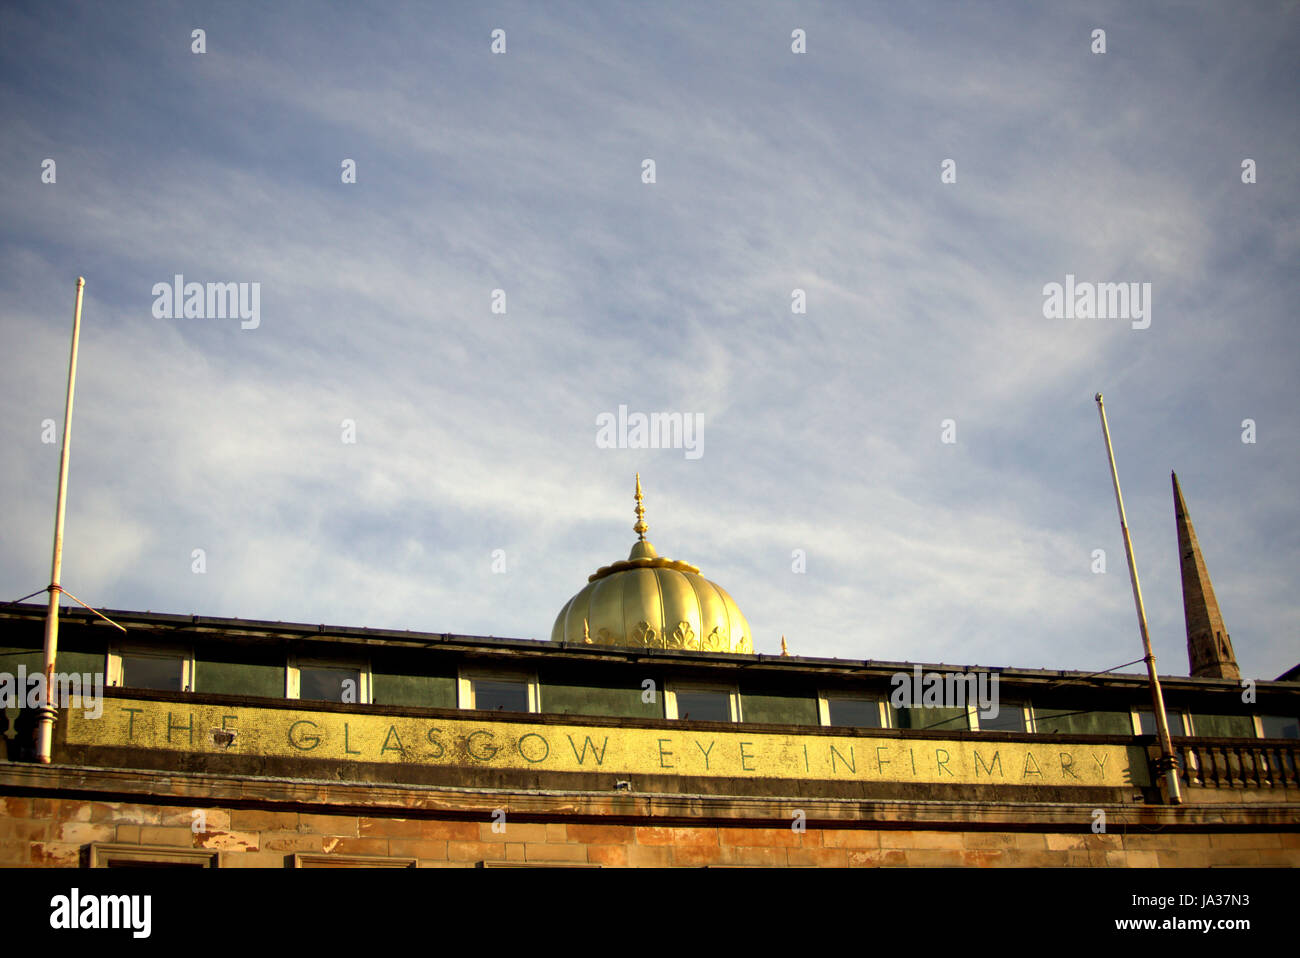 old Glasgow eye infirmary gold frontage sign against the sky and church spire and  Gurdwara dome Stock Photo